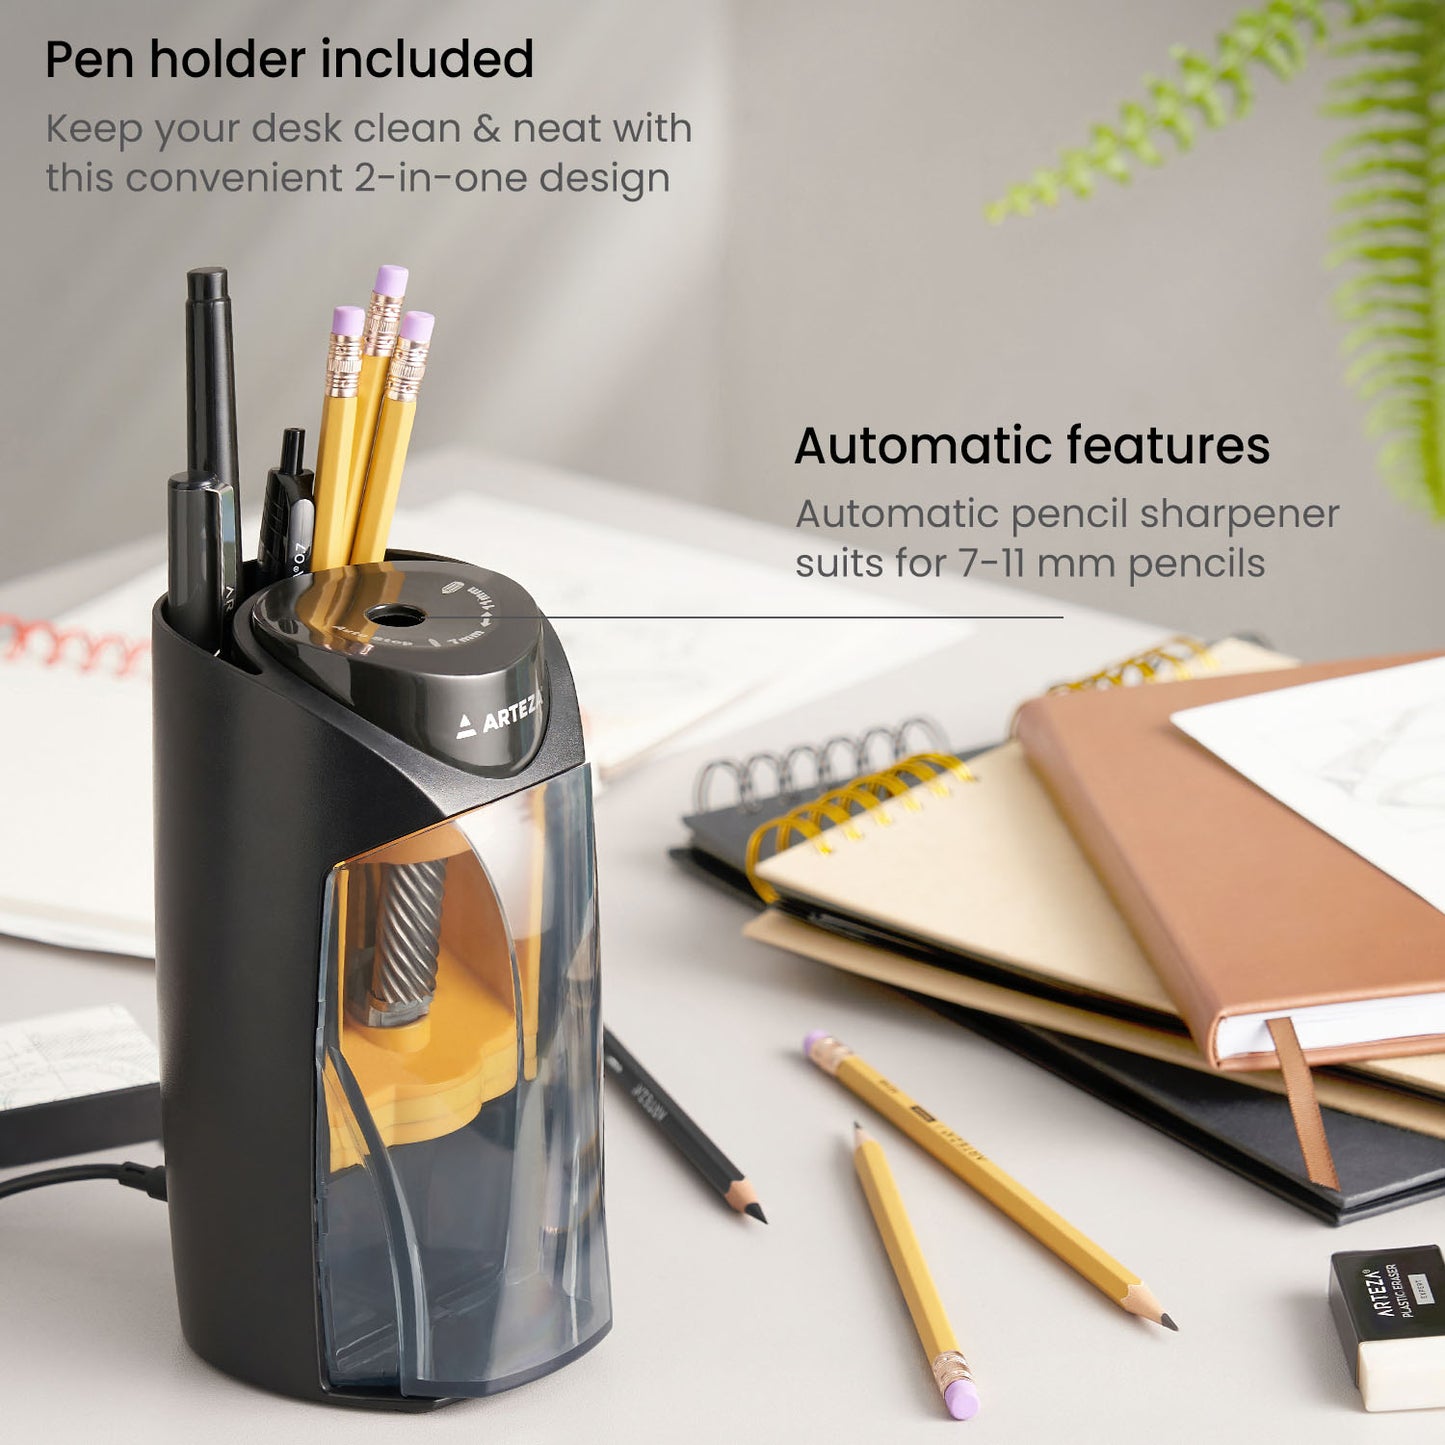 Store Pencils in your Automatic Pencil Sharpener